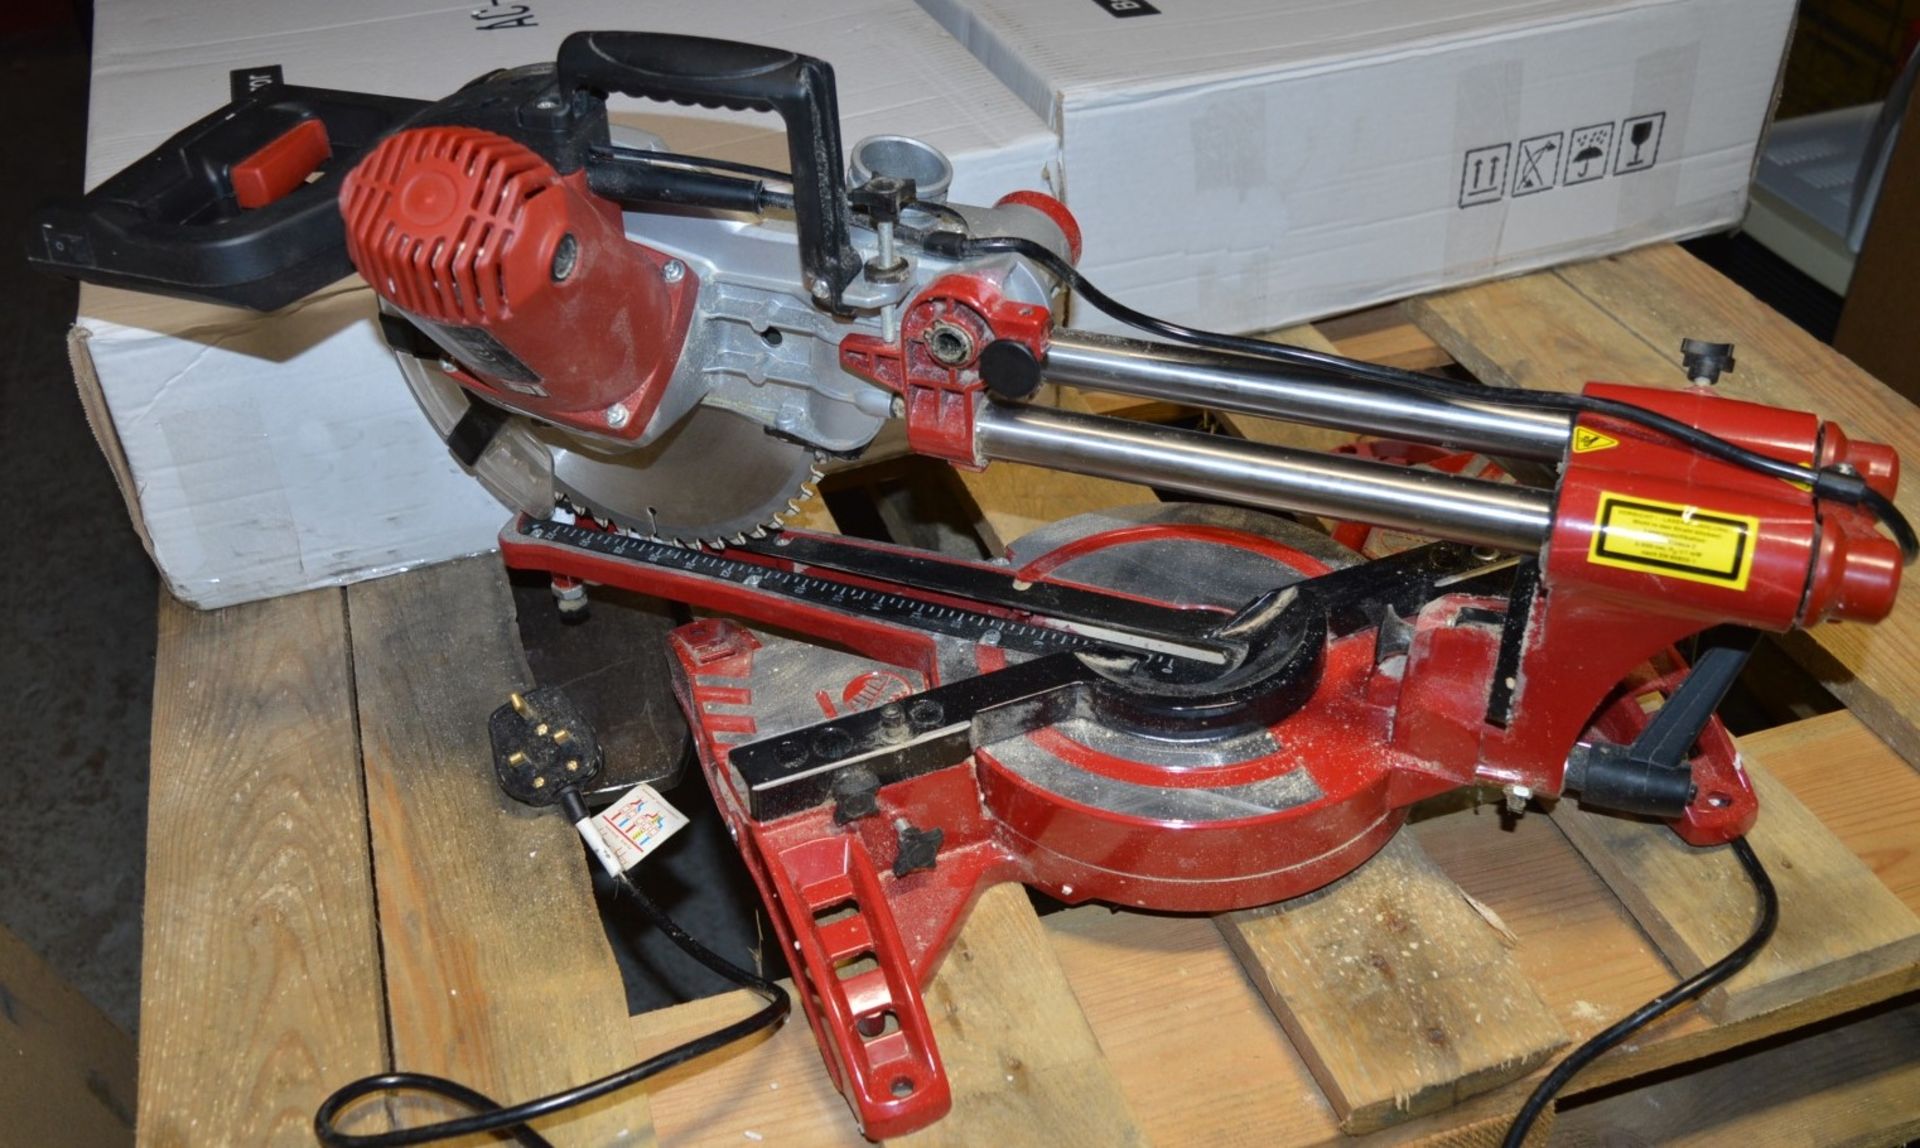 1 x Einhell Sliding Mitre Saw - Boxed With Accessories - Working Order - CL010 - Location: - Image 6 of 10